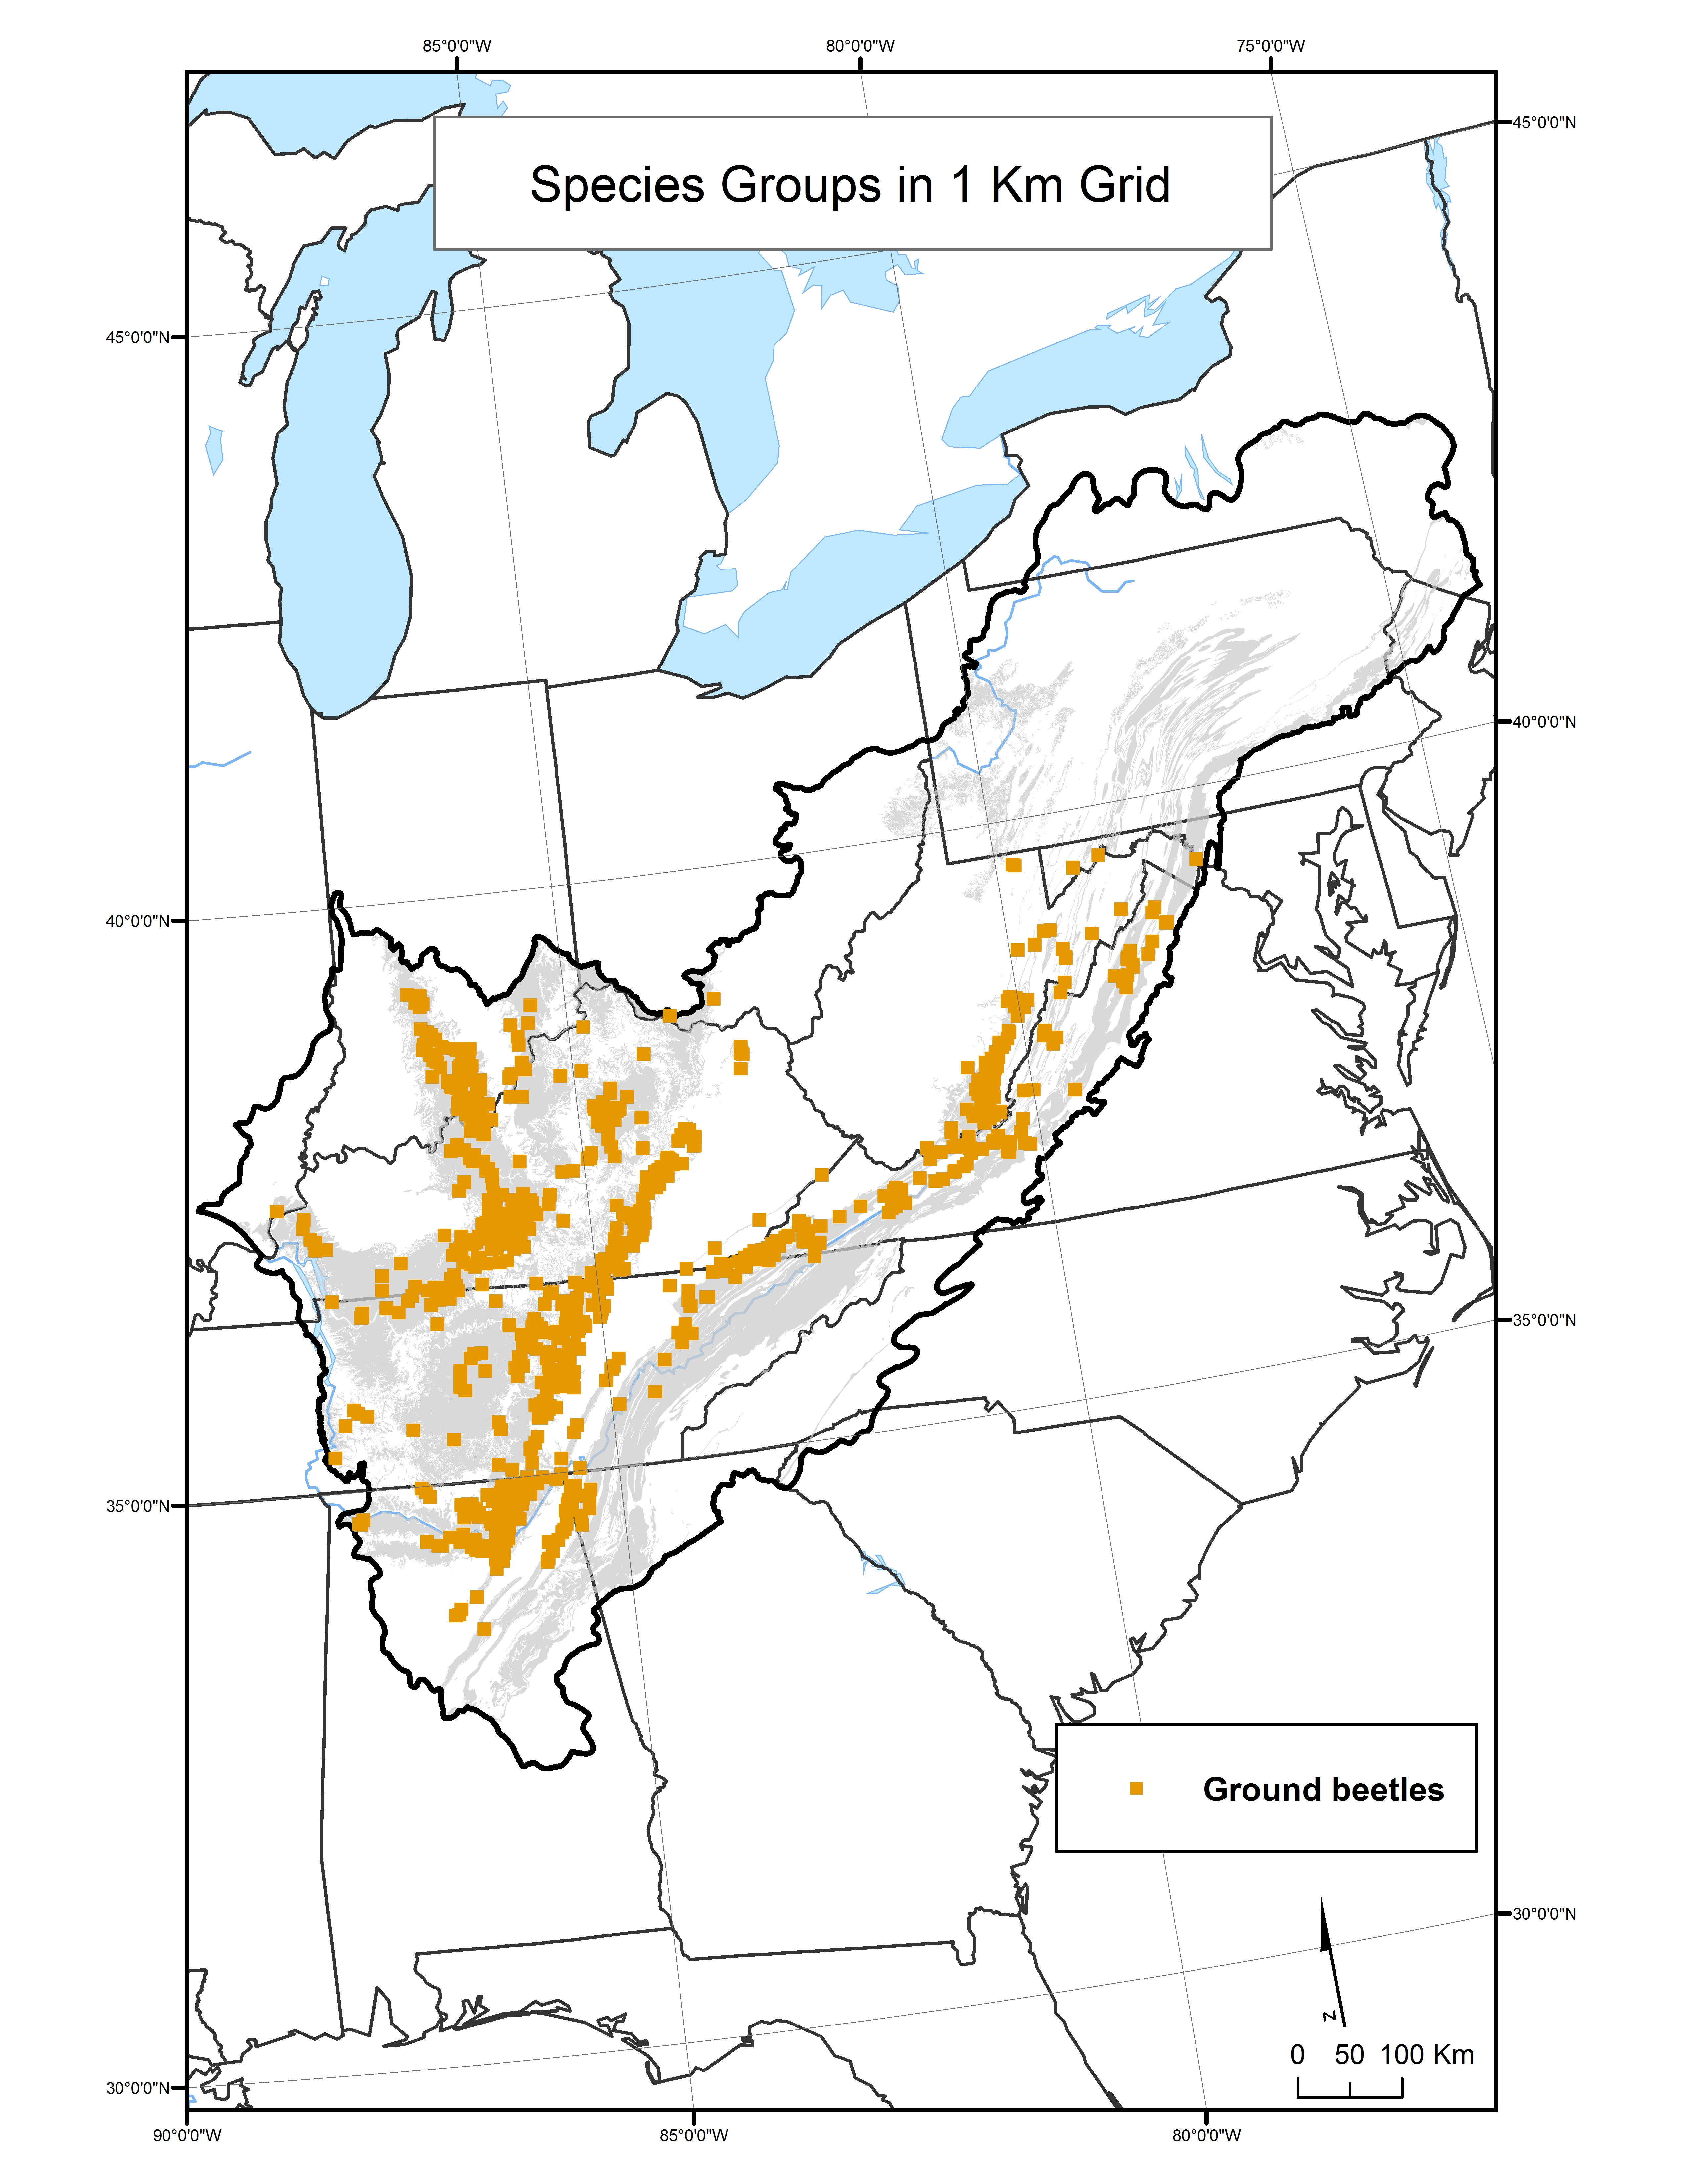 Ground Beetle Species Distribution by 1km Grid